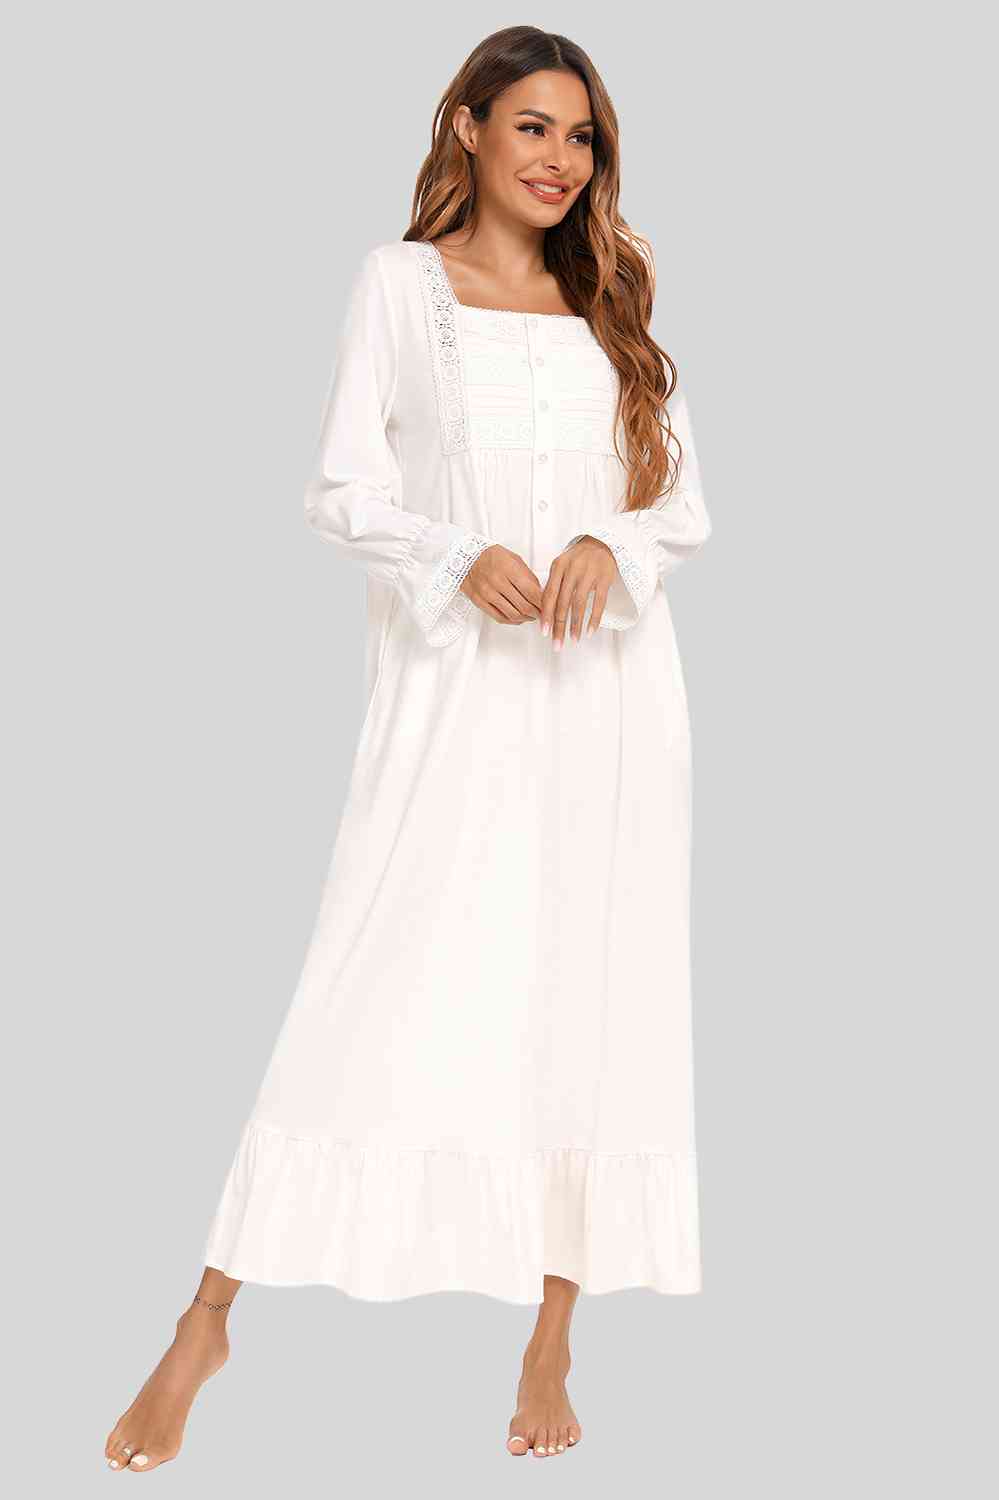 Lace Detail Square Neck Flounce Sleeve Night Dress White